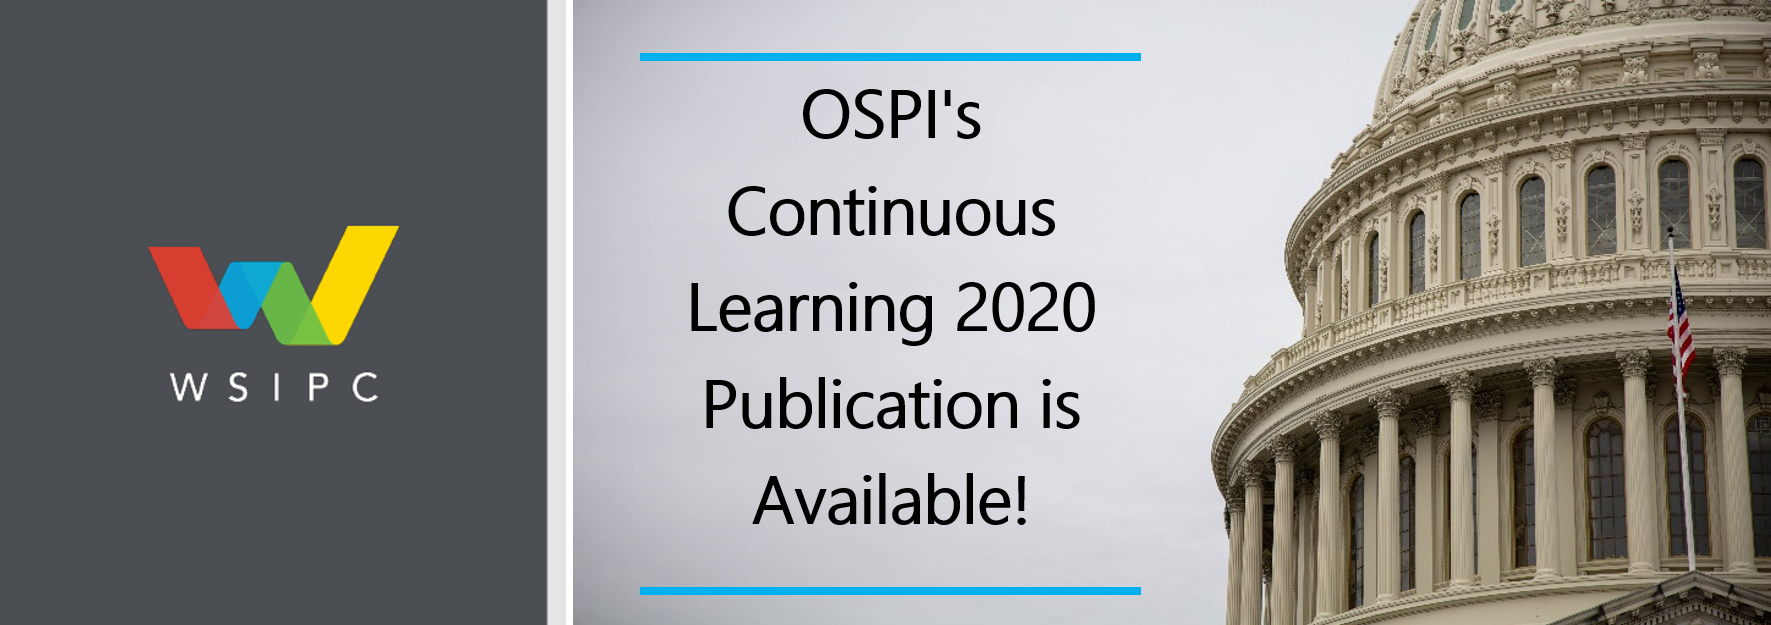 OSPI Continuous Learning Publication